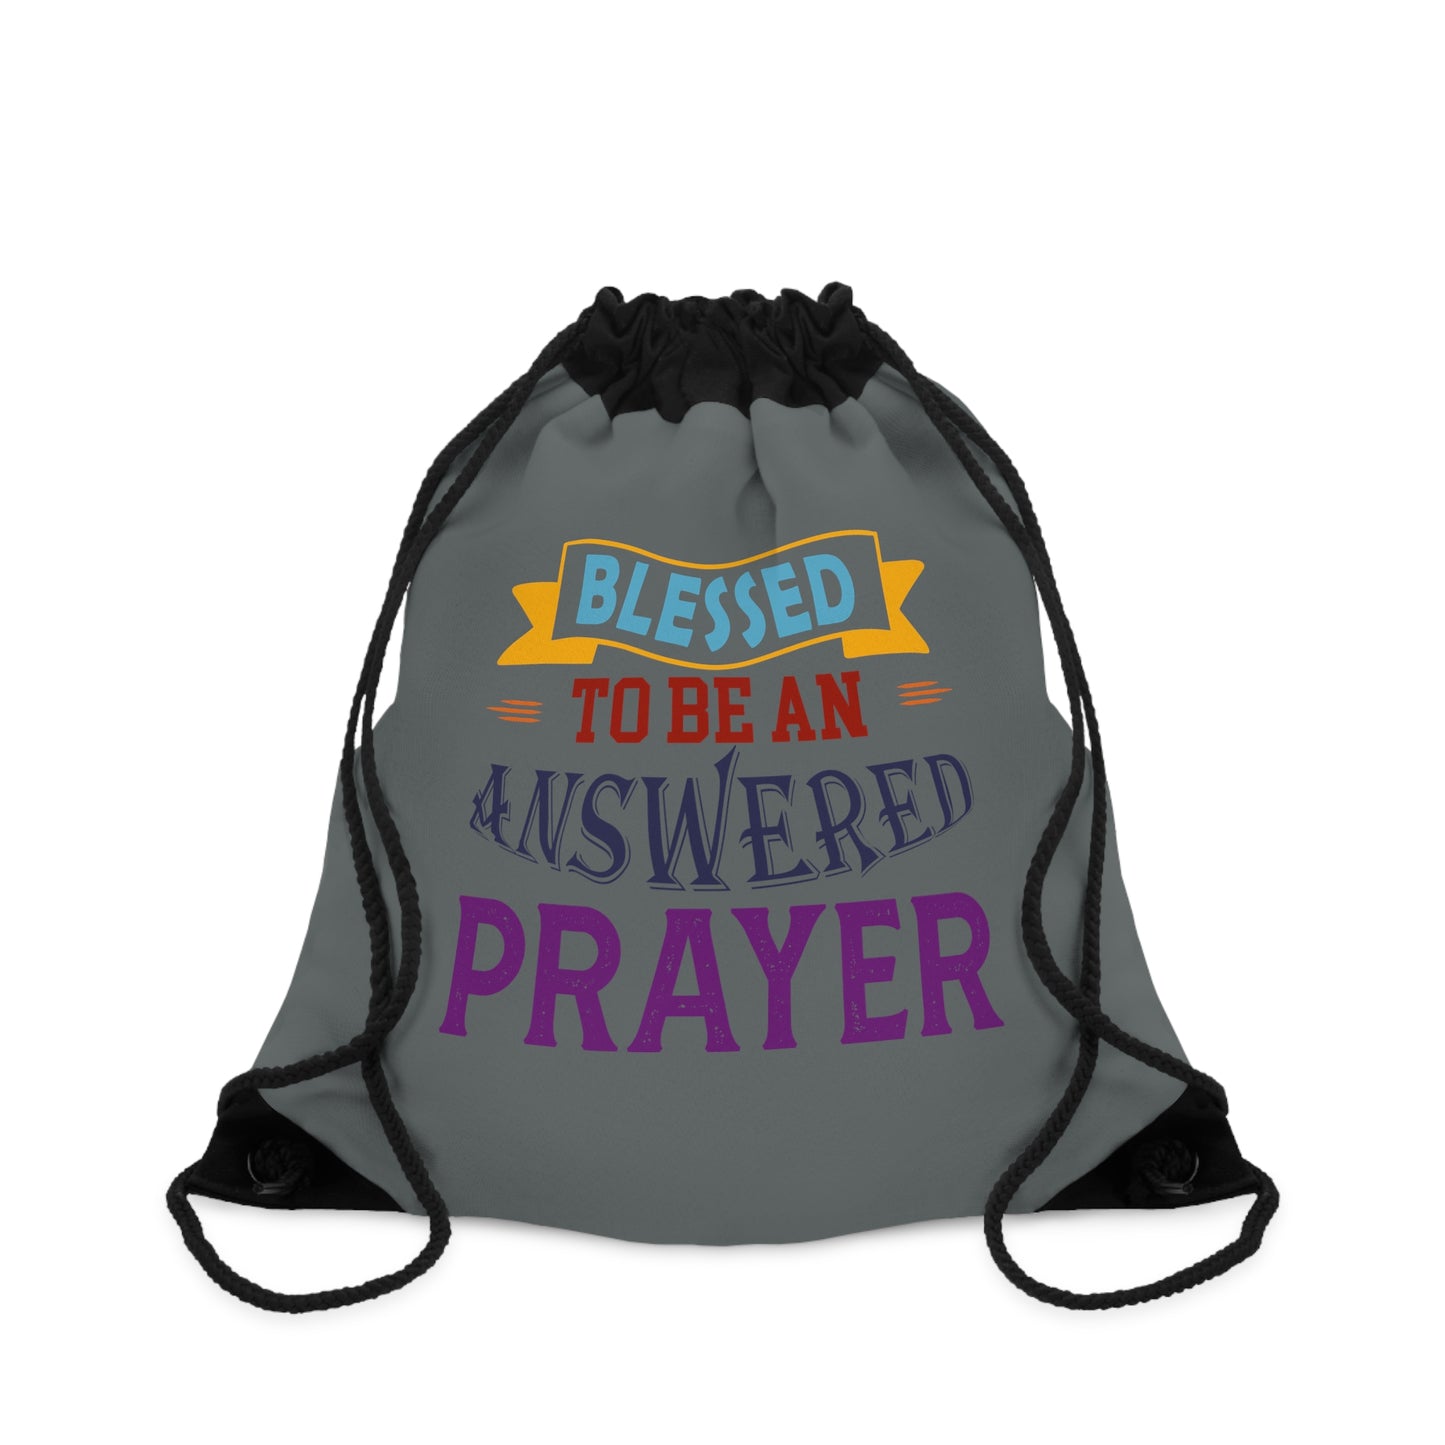 Blessed To Be An Answered Prayer Drawstring Bag